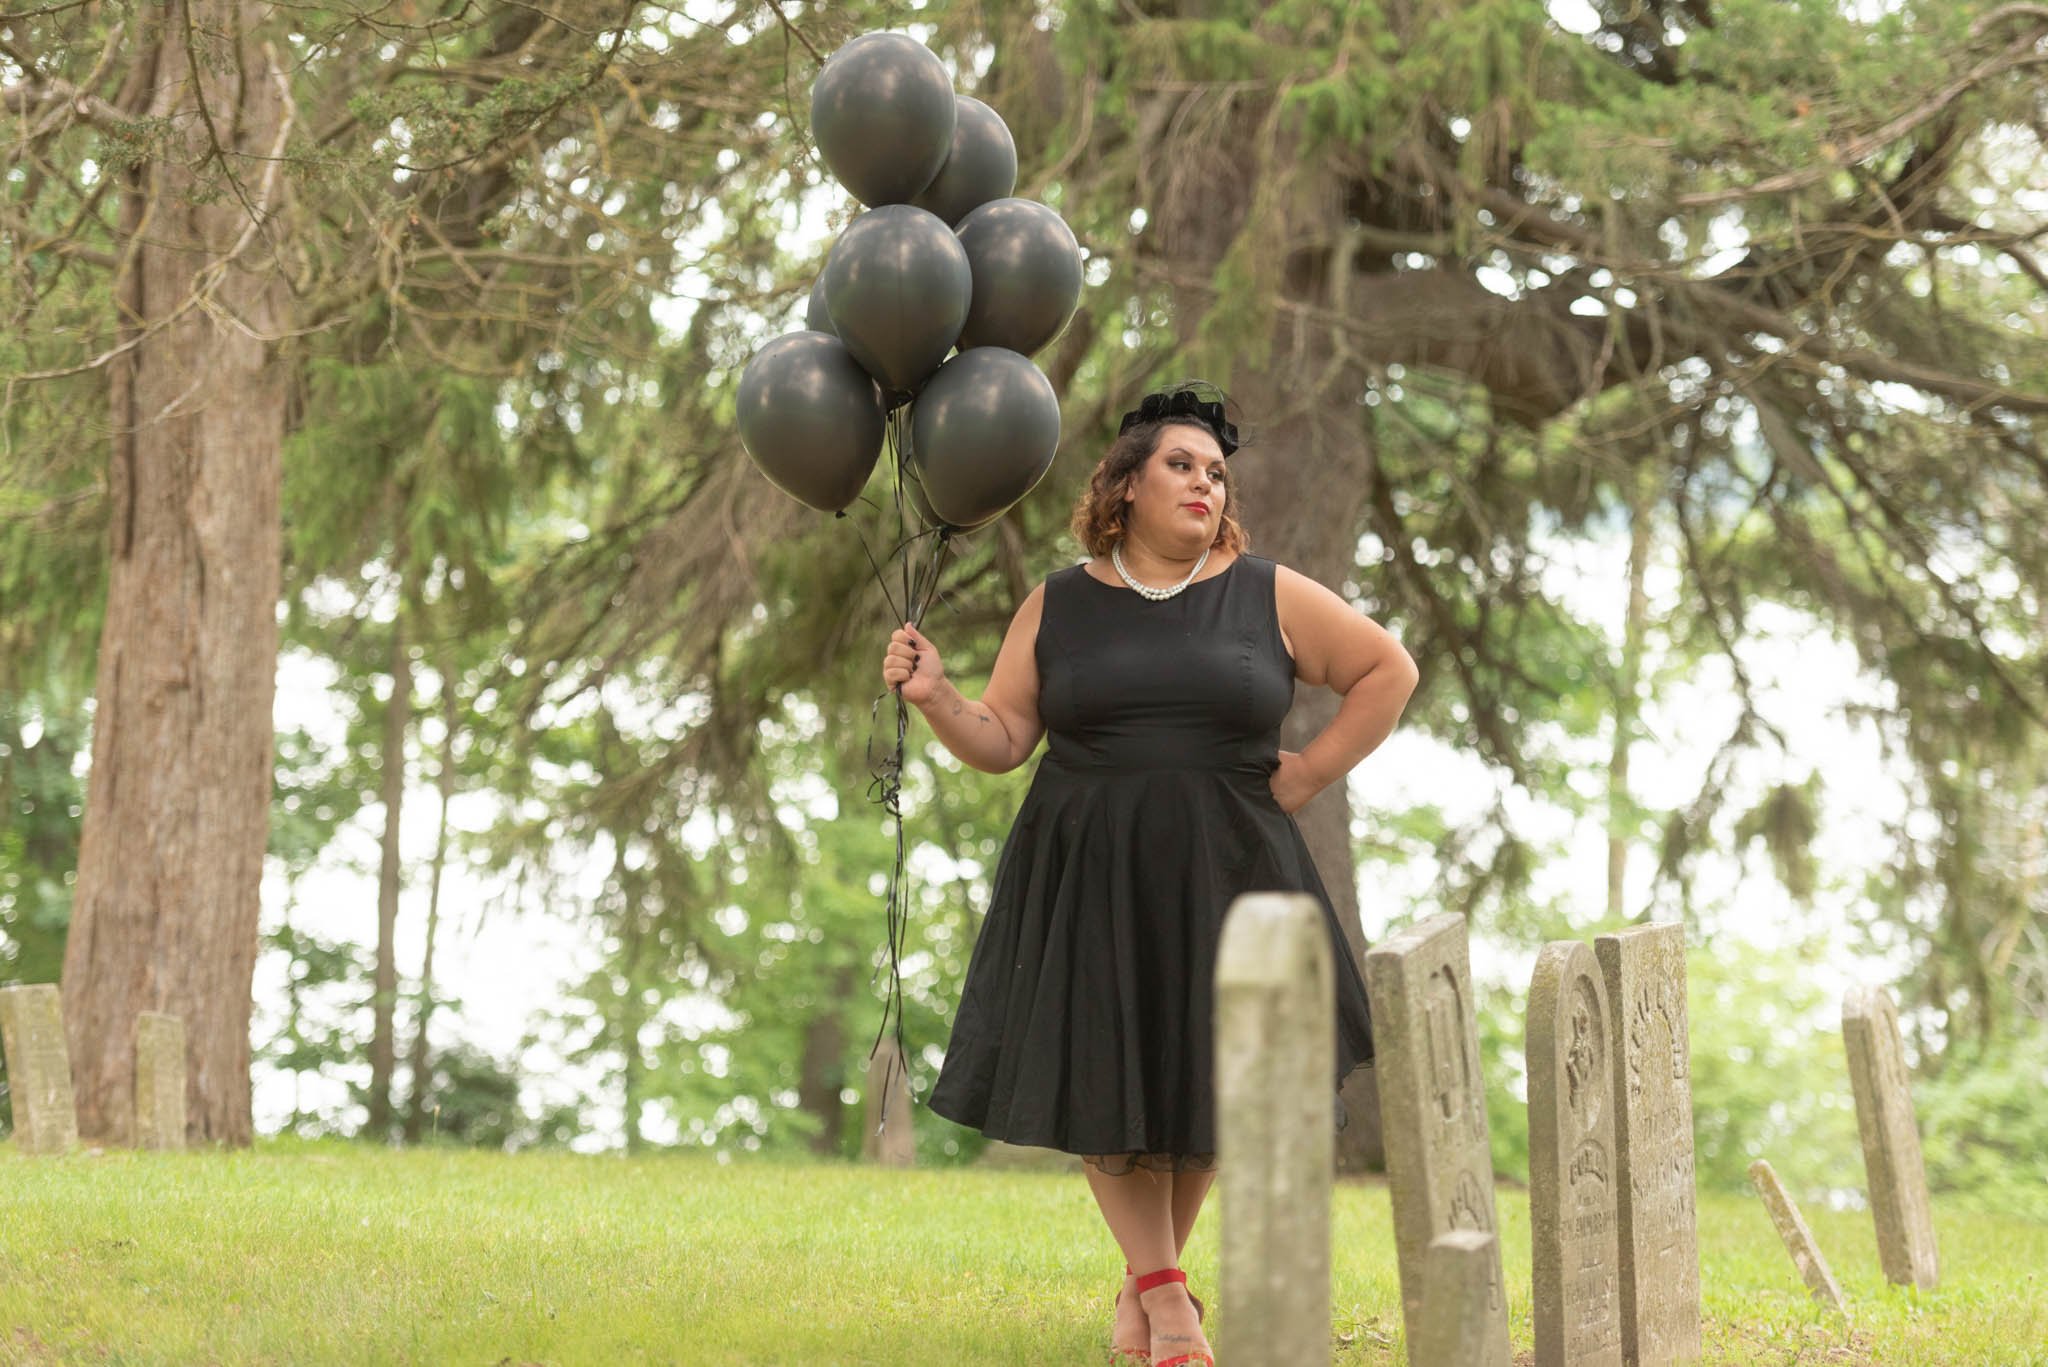  Samantha in black dress and vintage black hat poses in cemetery with black balloons.  